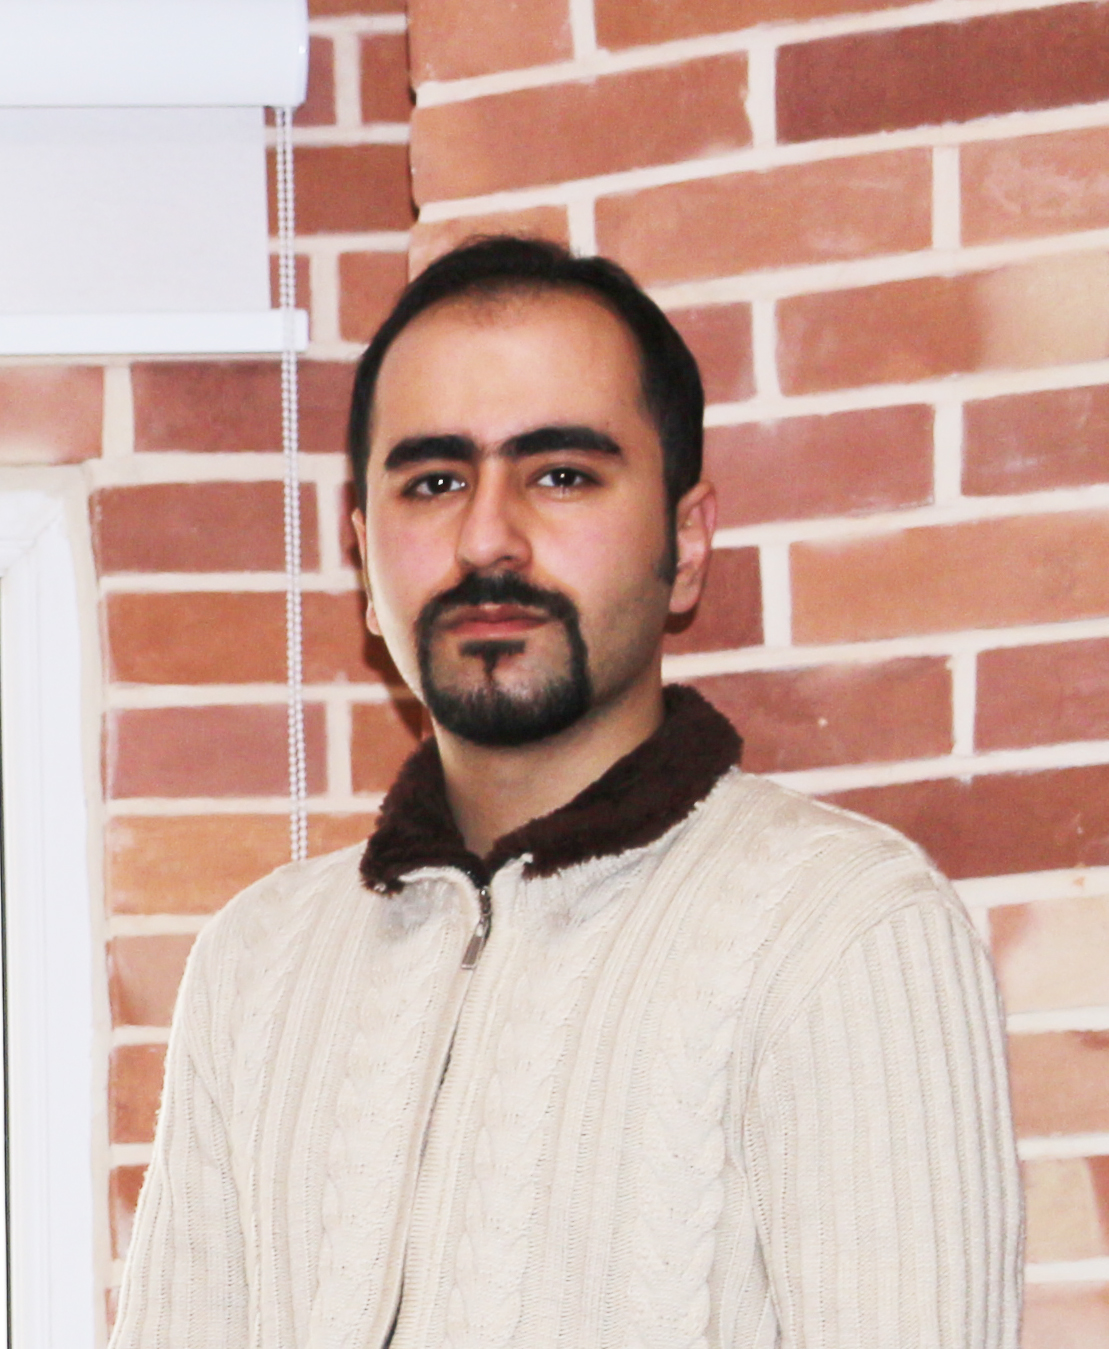 Hossein Aghahosseini Software Architect at Web Developement Company